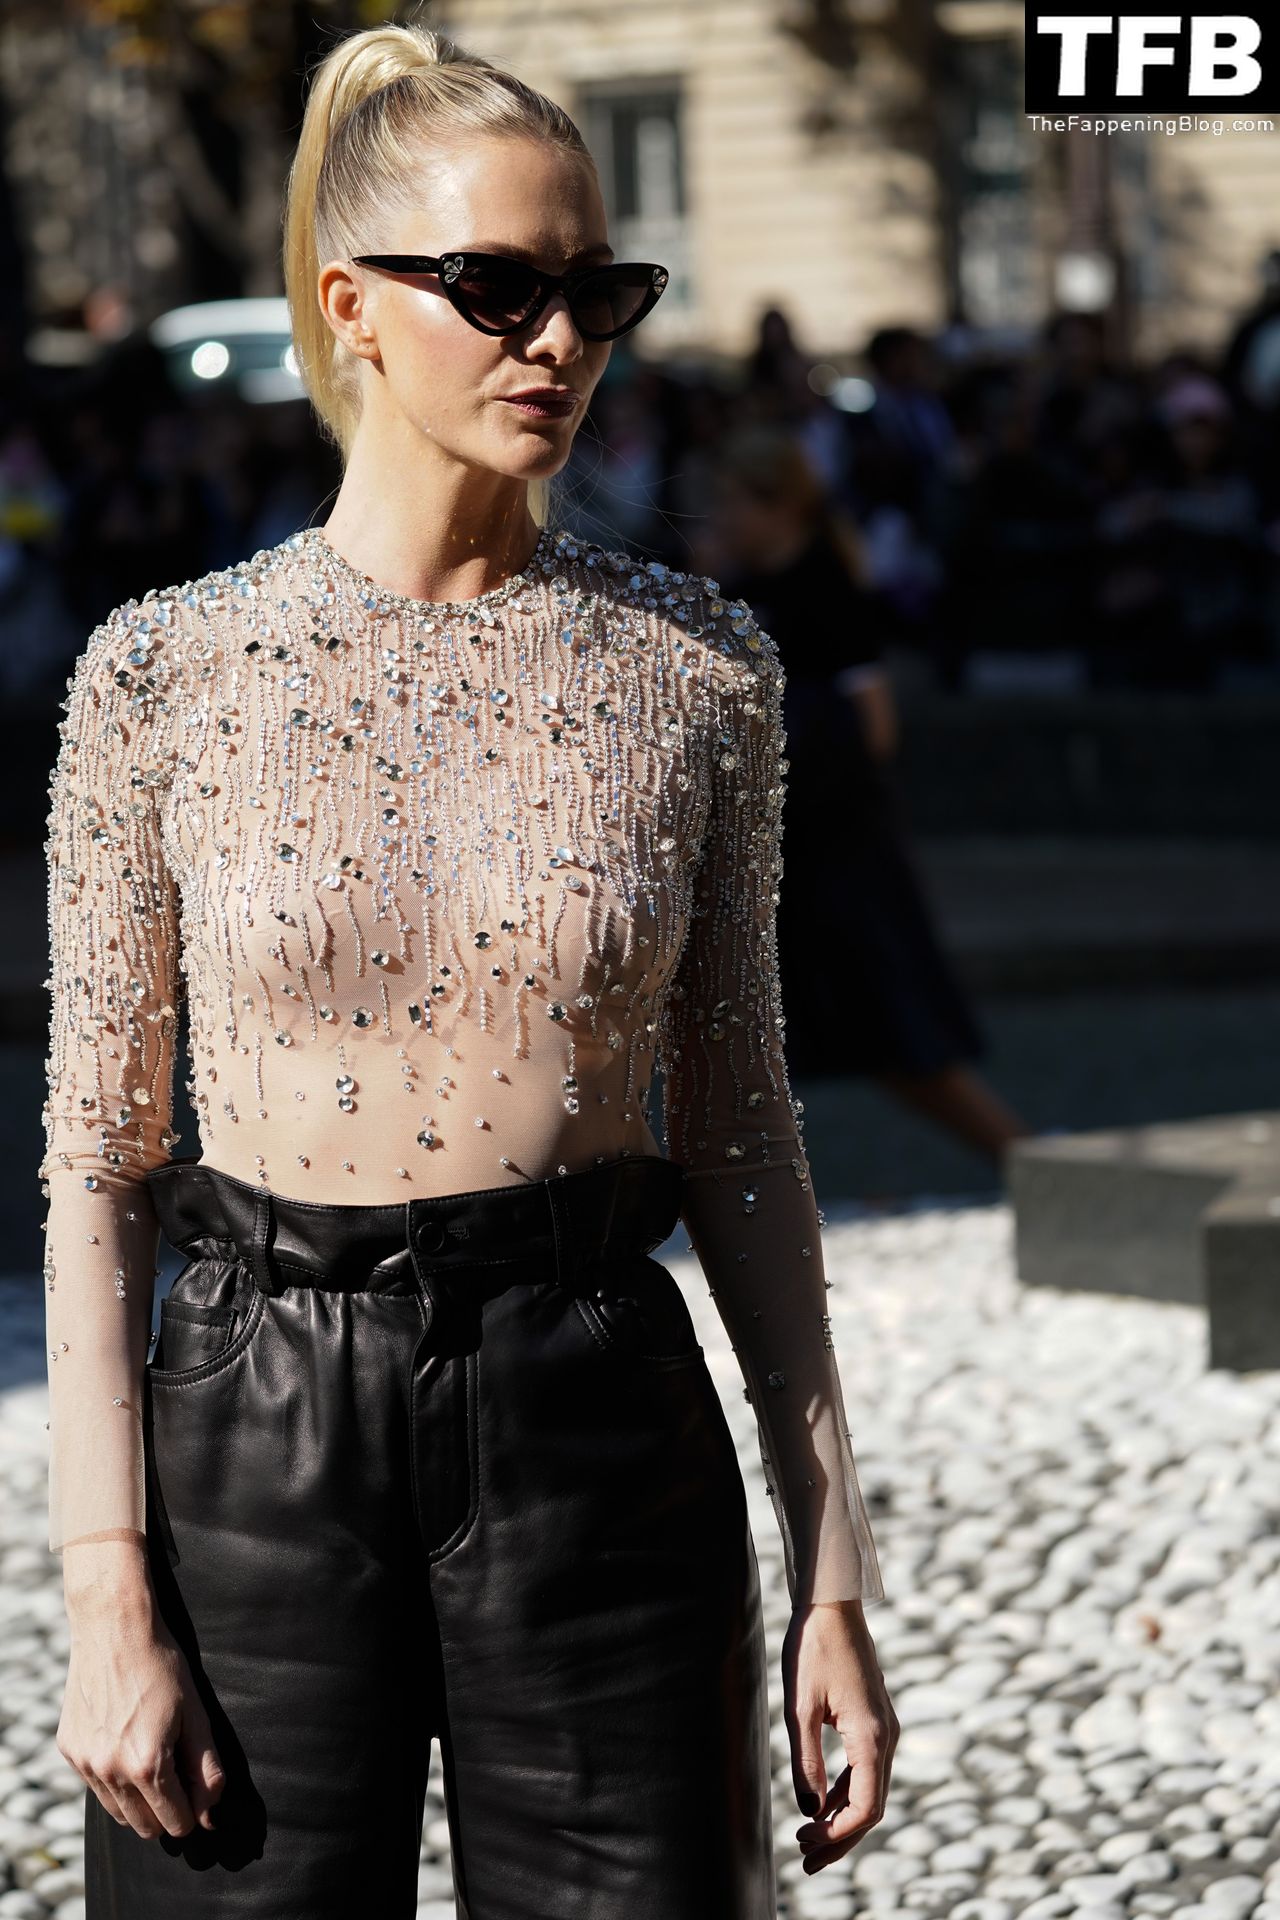 Poppy Delevingne Poses in a See-Through Top at Miu Miu Womenswear Show (25 Photos)